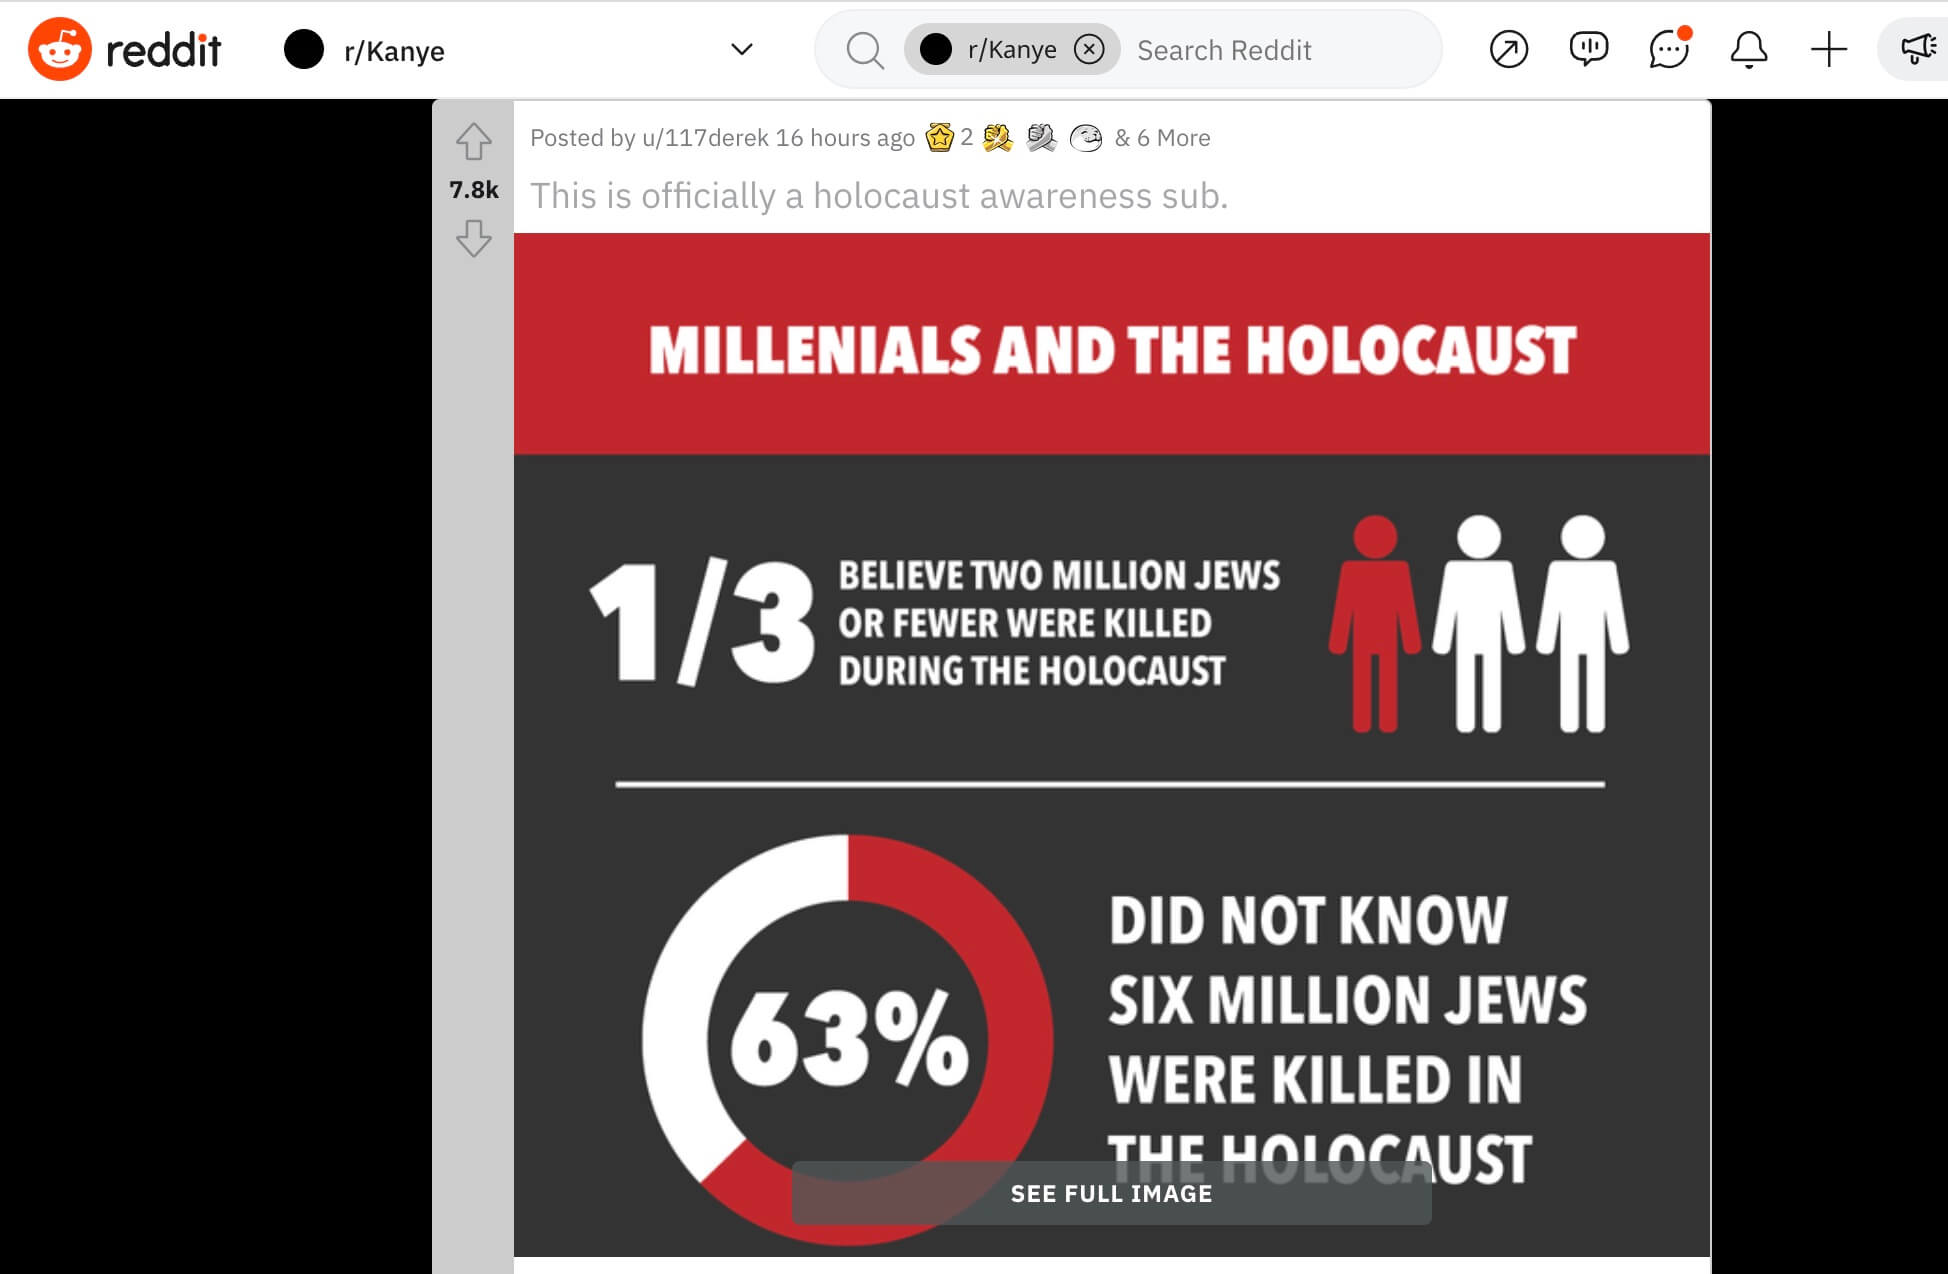 Members of r/Kanye turn it into a Holocaust education project.